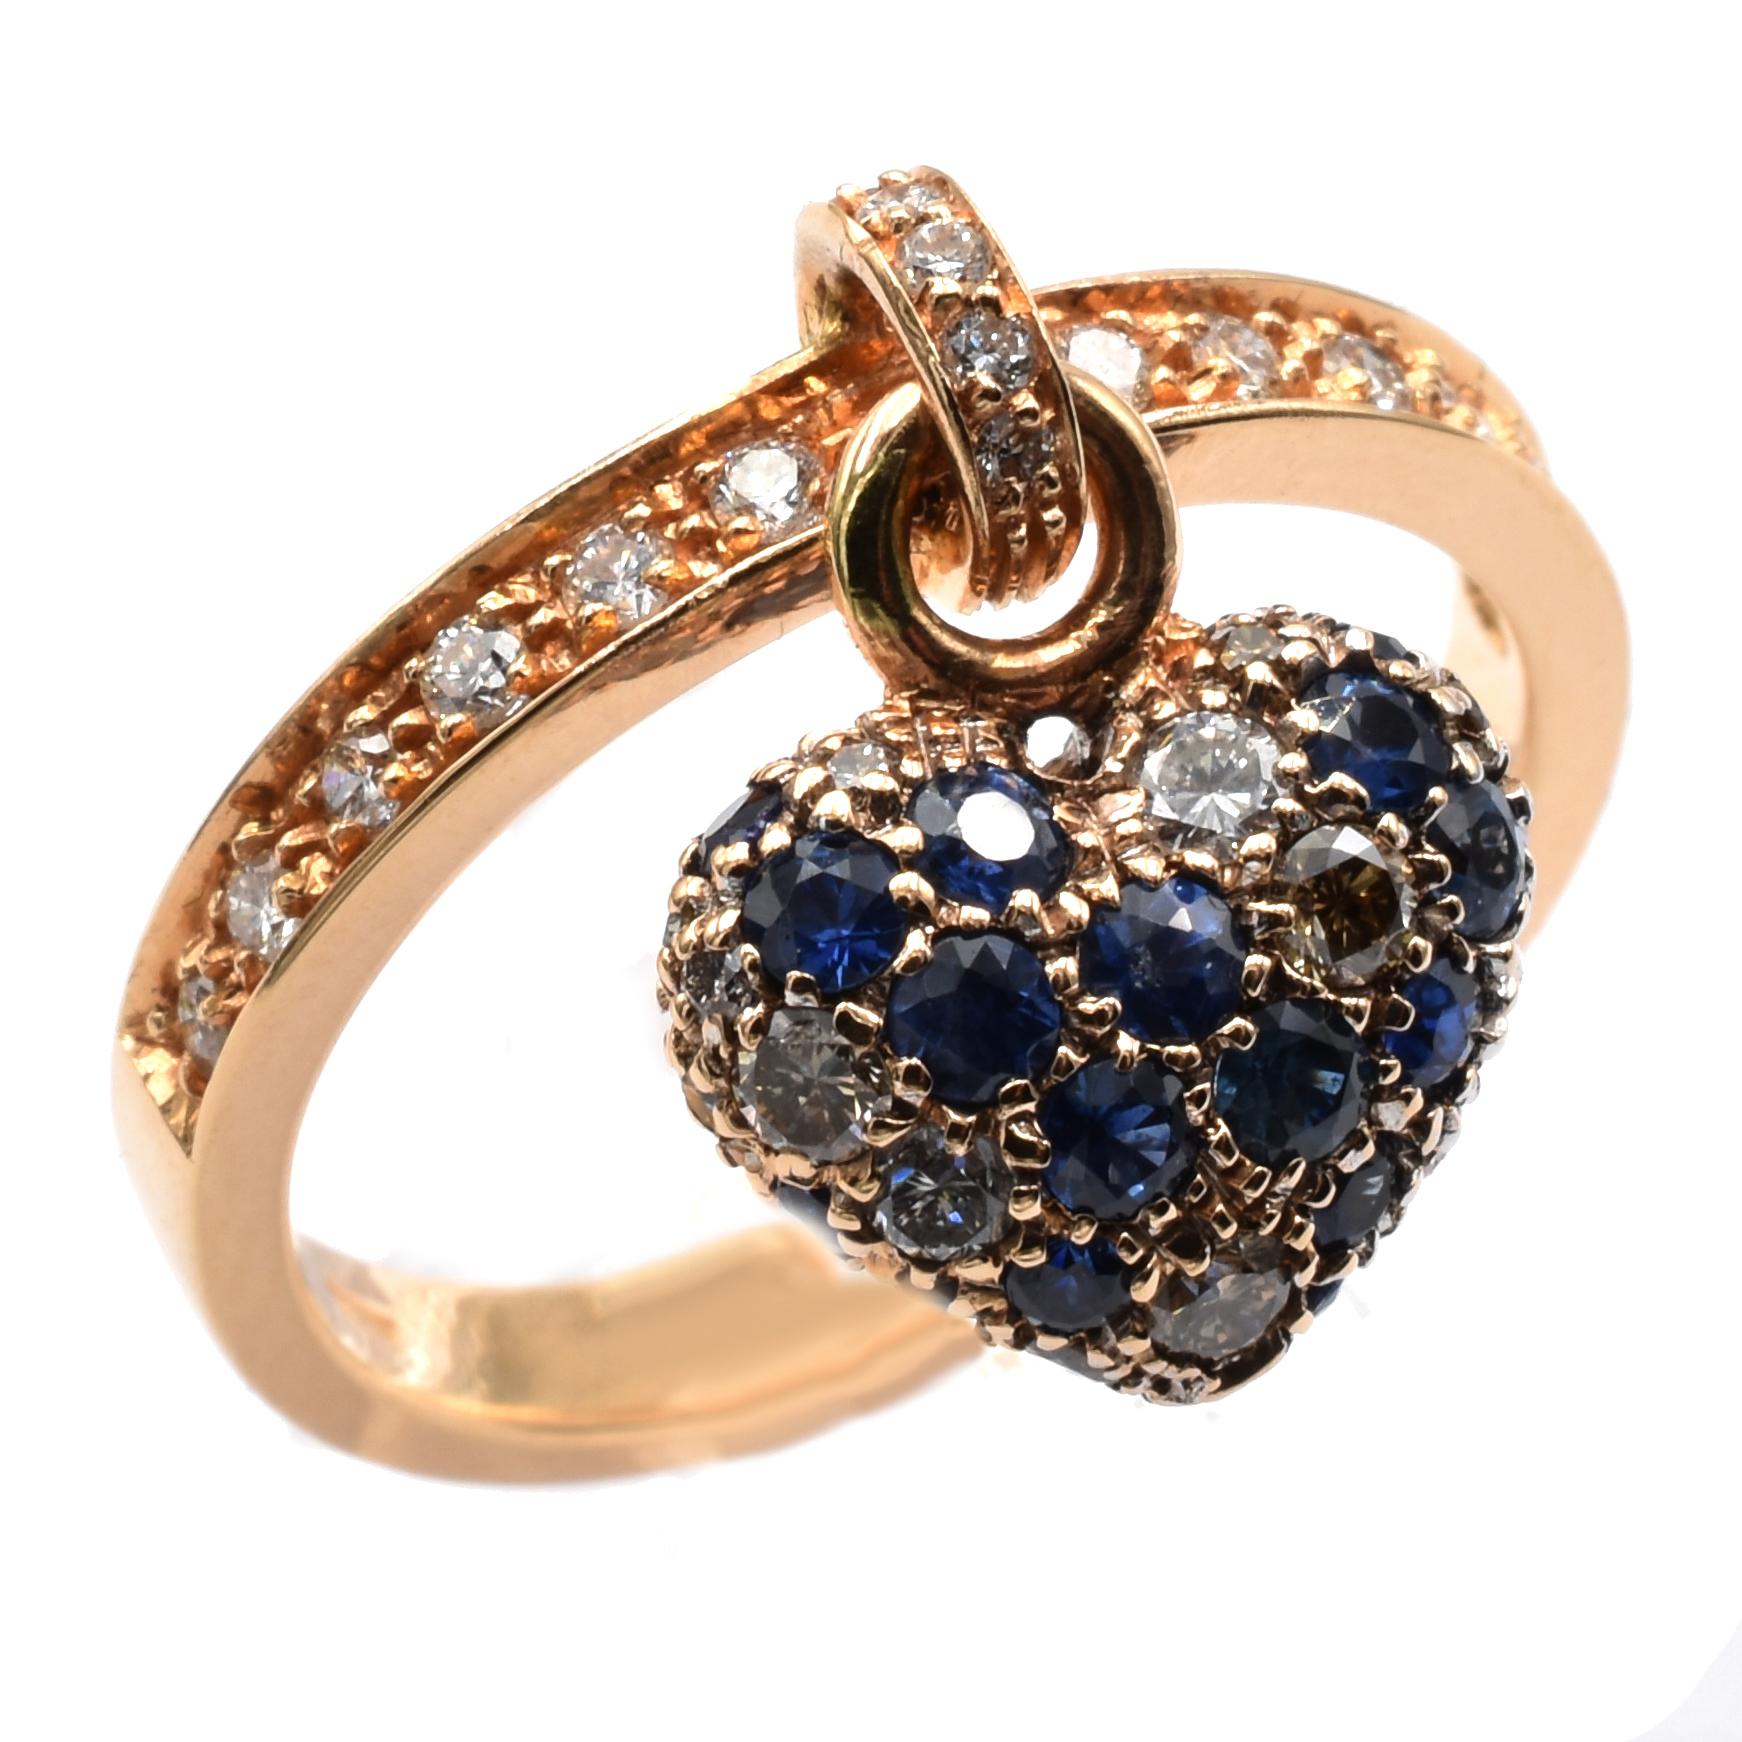 Contemporary Gilberto Cassola Sapphire and Diamond Heart Charm Ring Rose Gold, Made in Italy